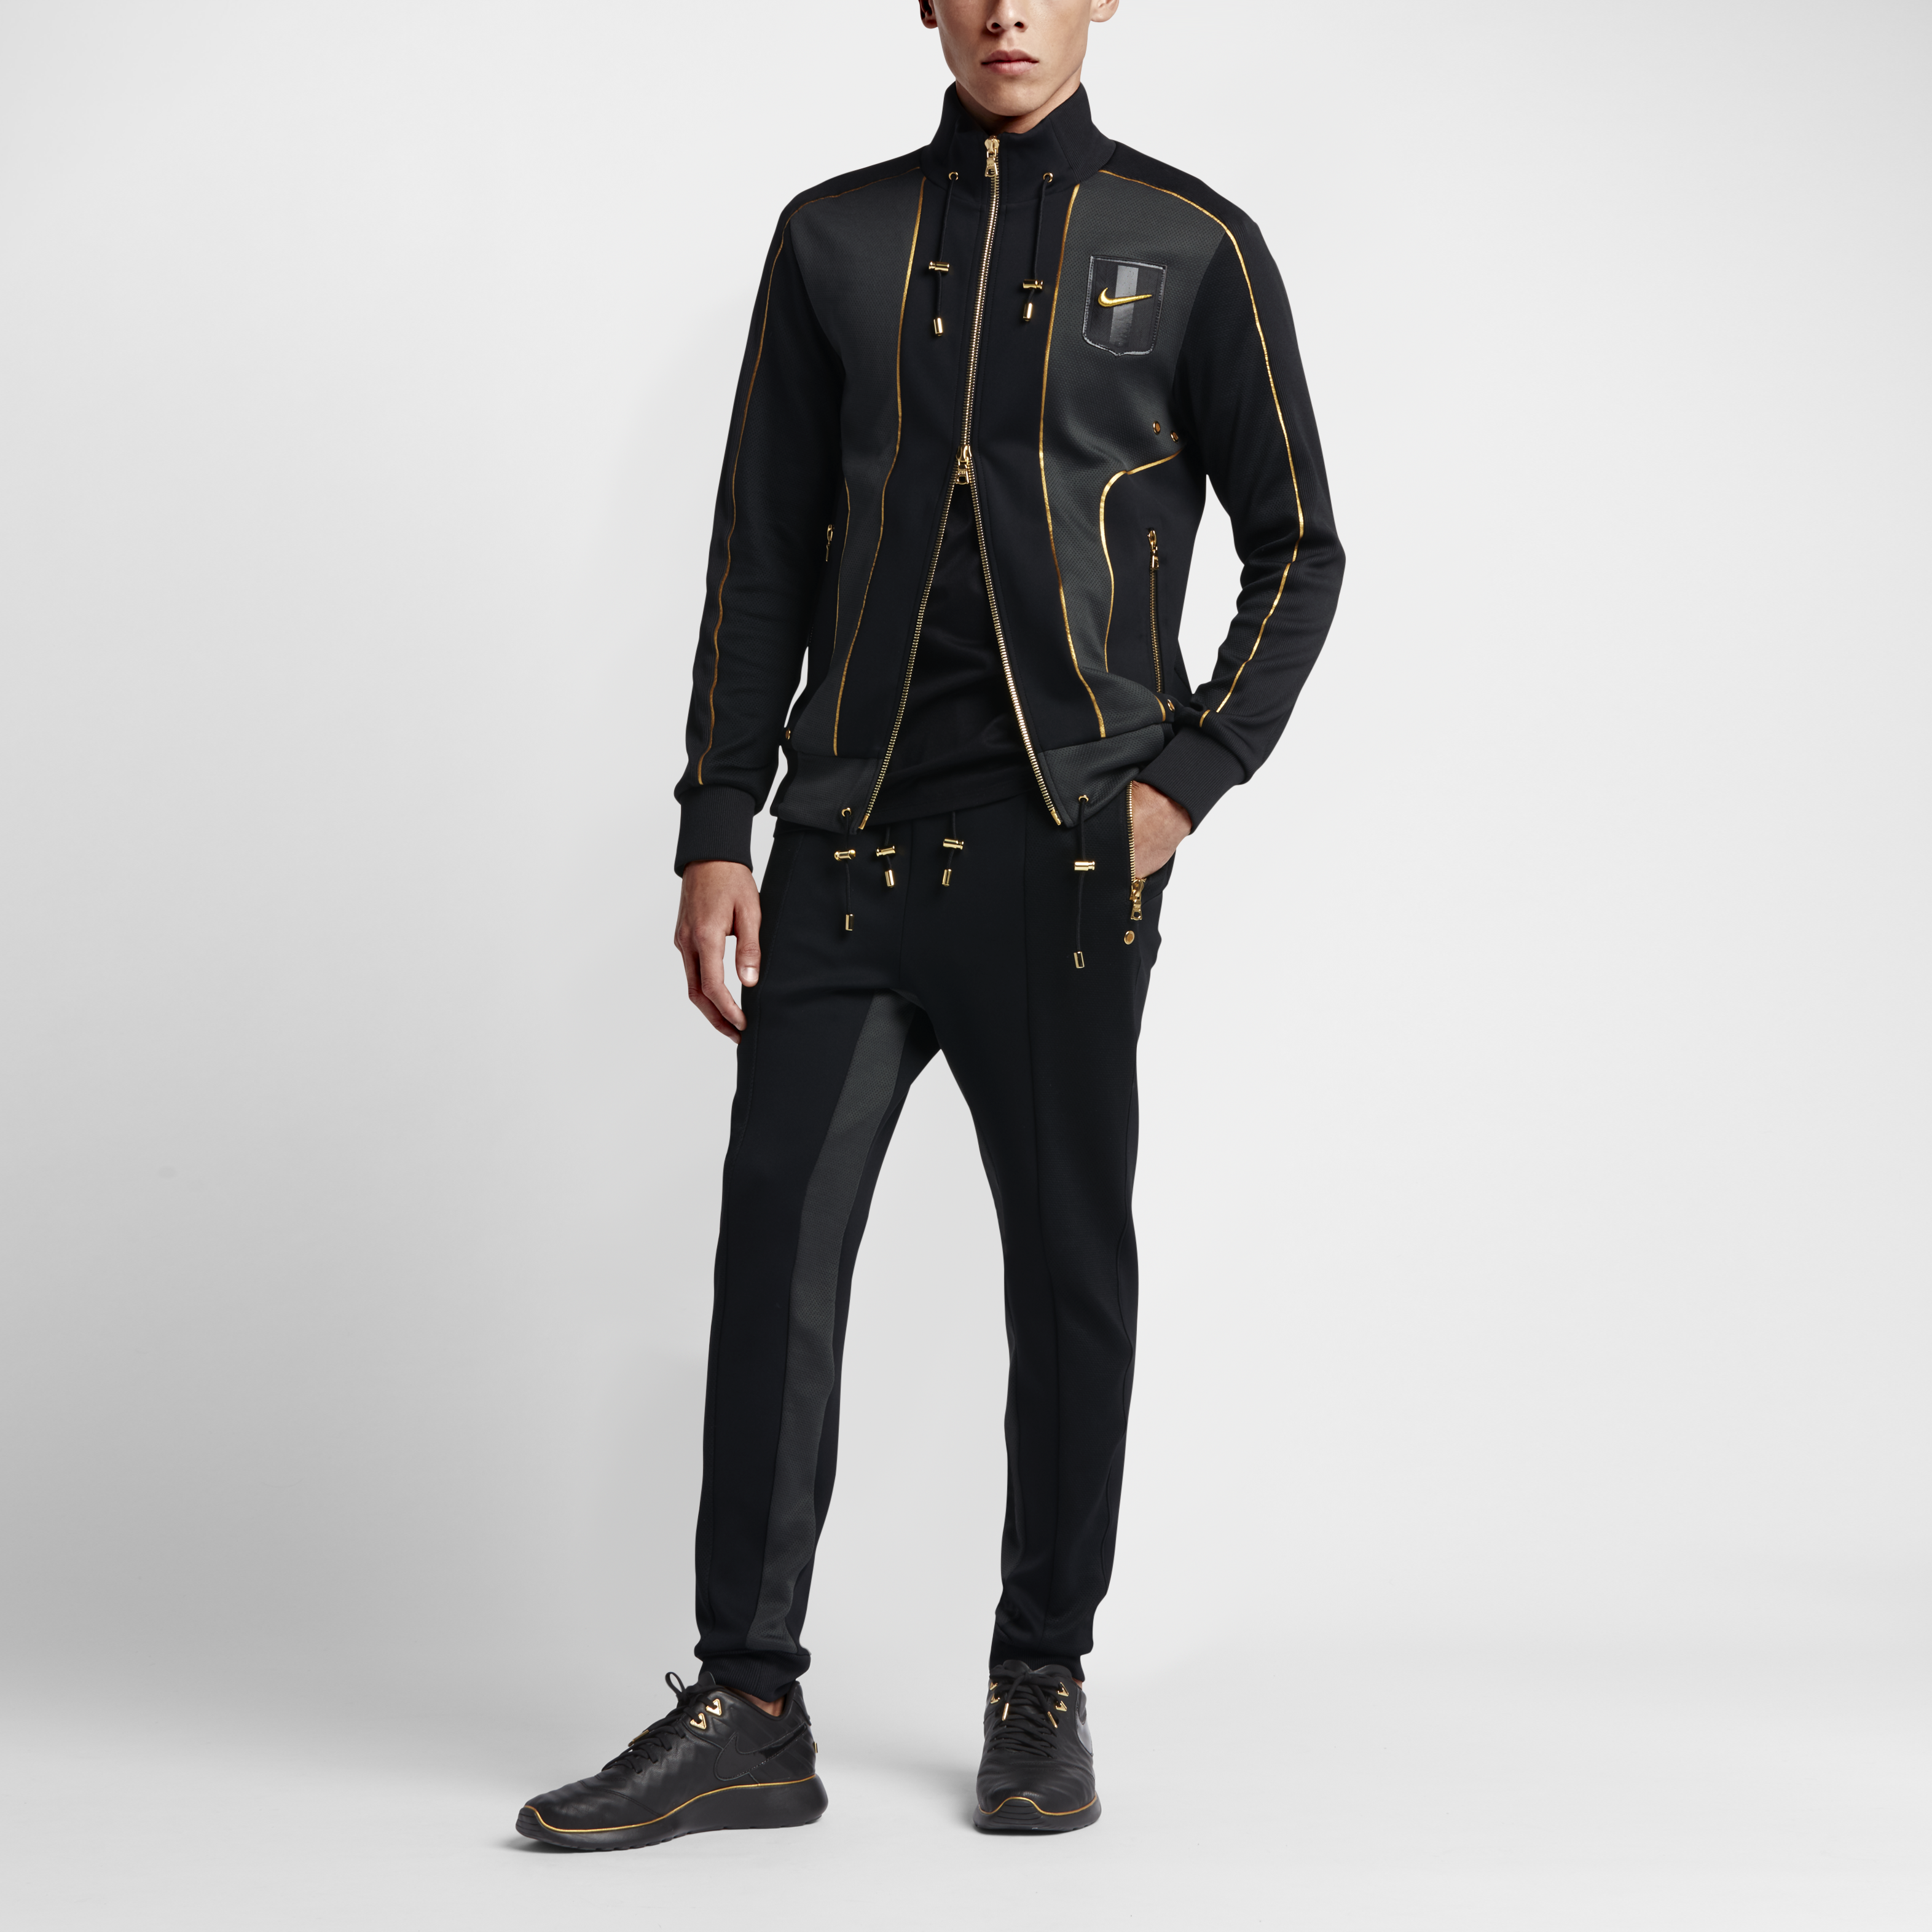 Olivier Rousteing Collaborates with NikeLab